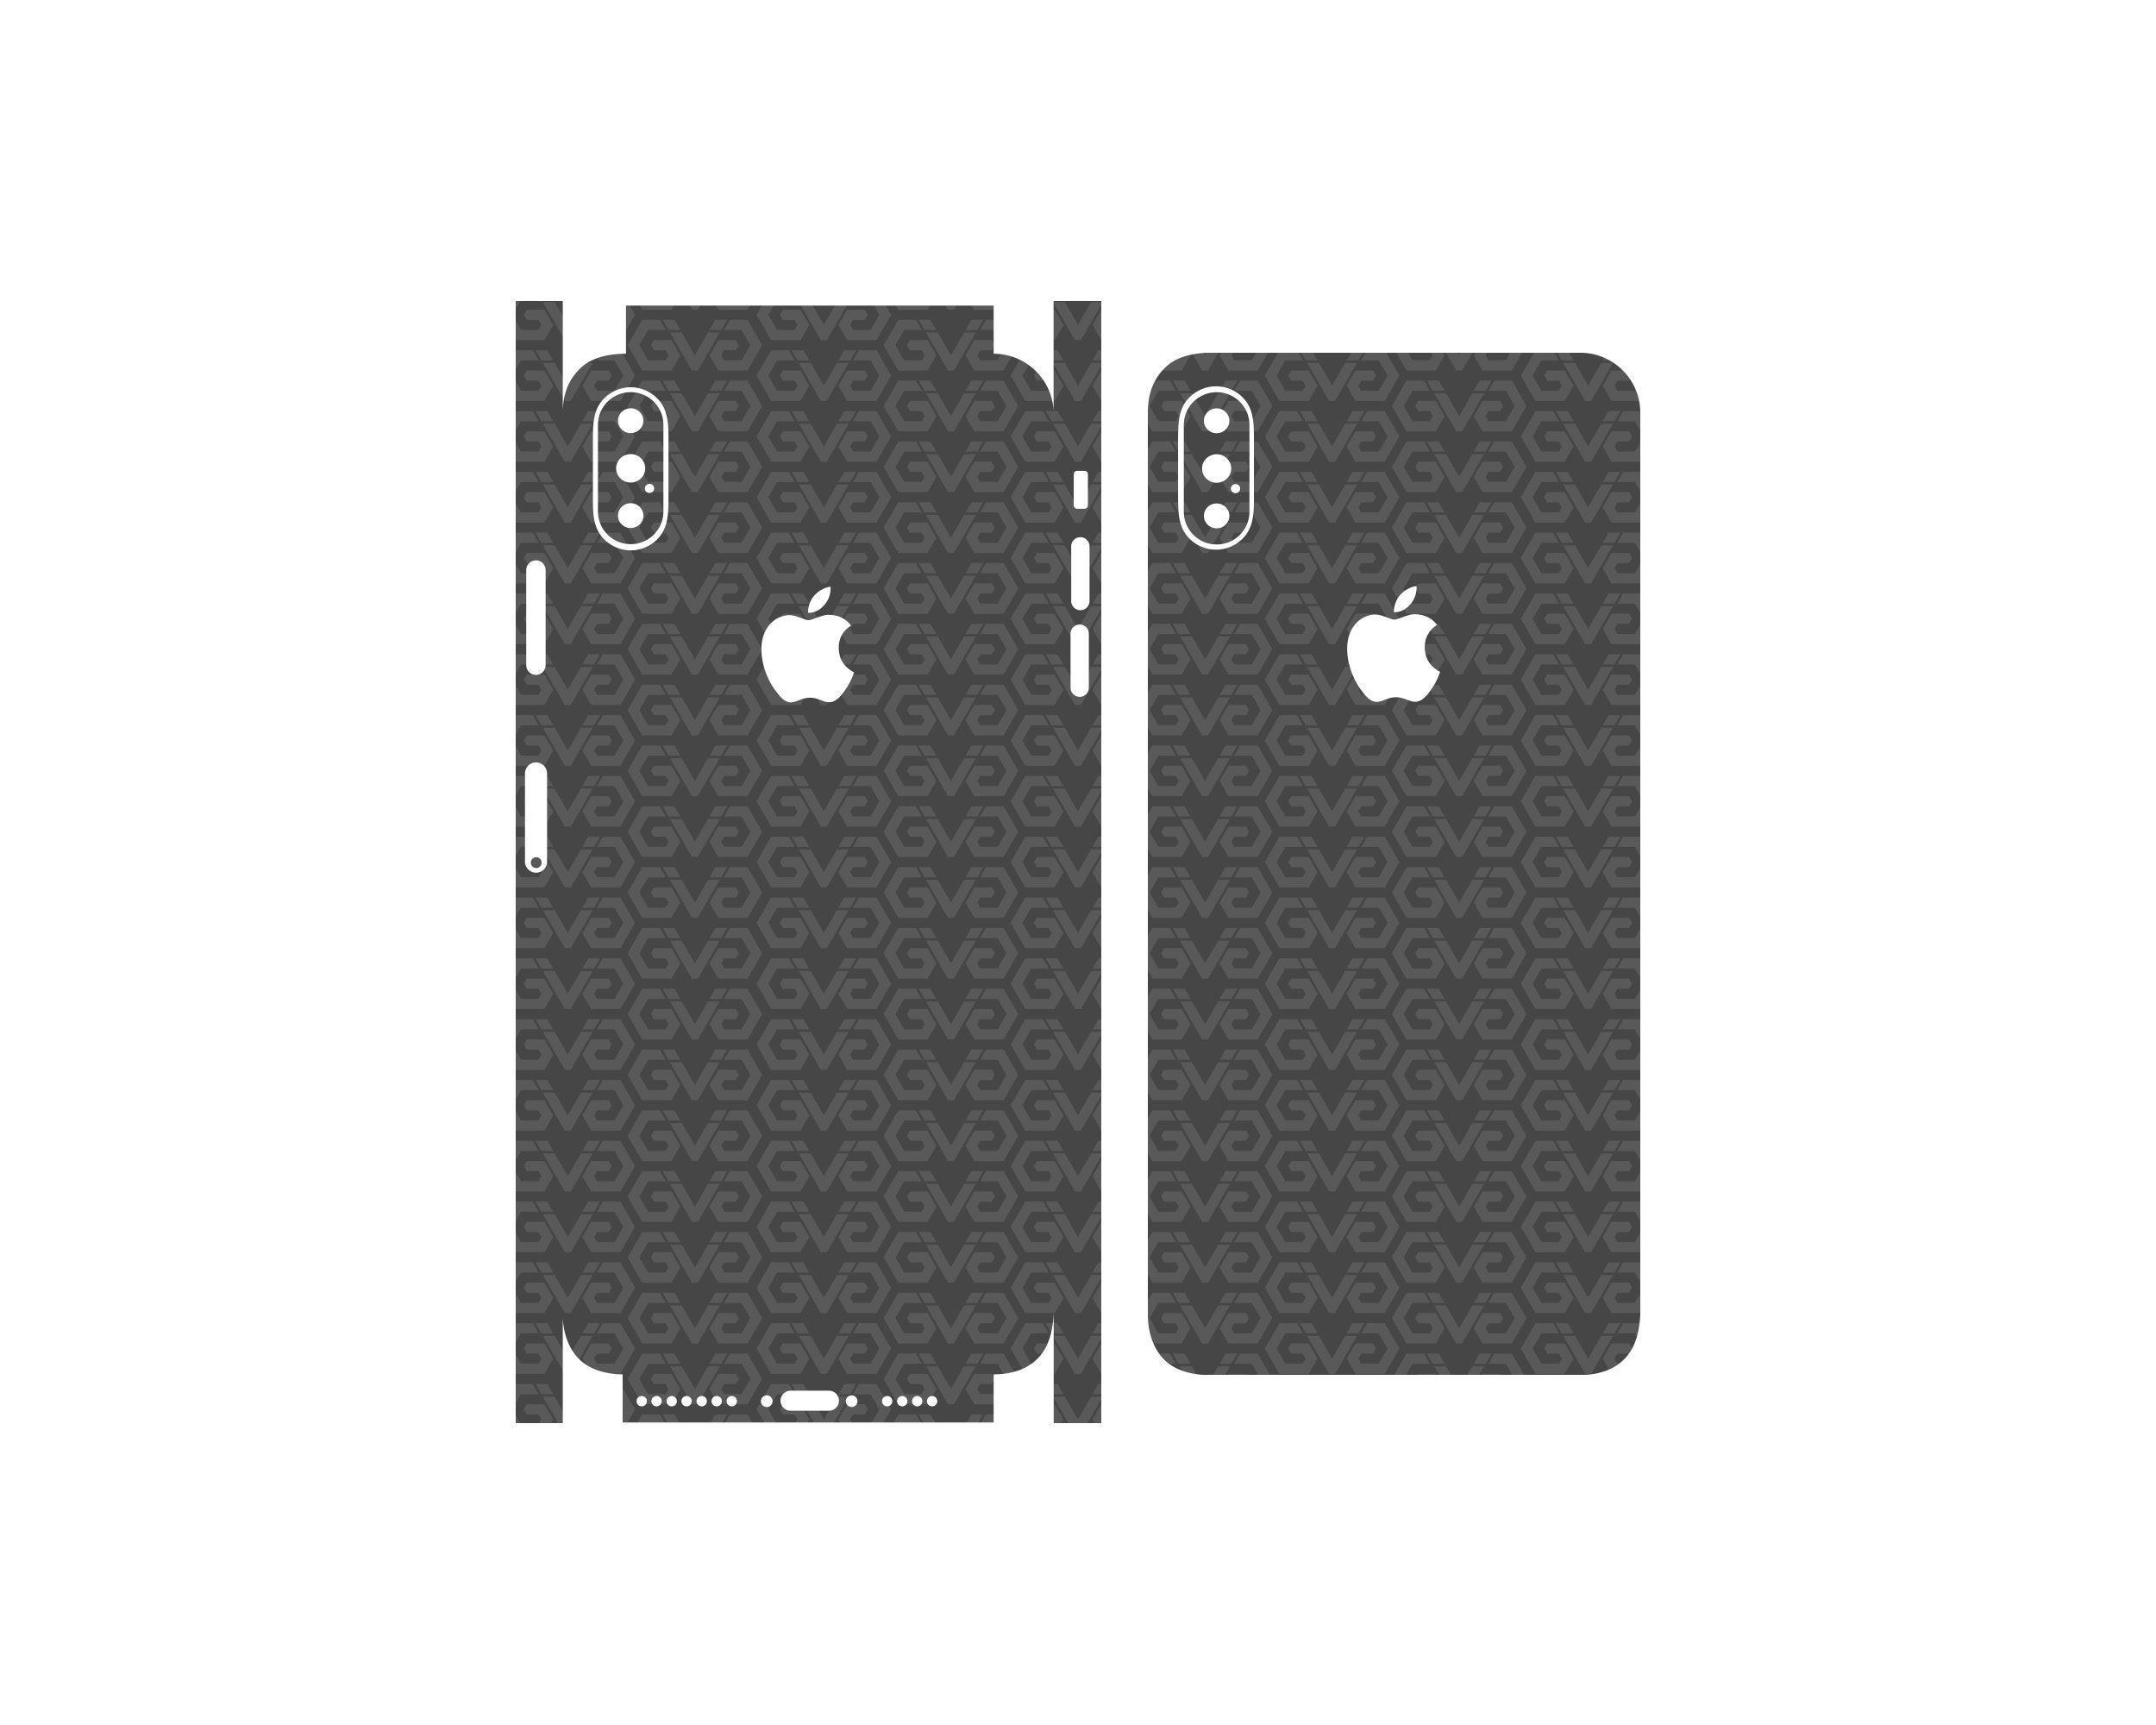 IPhone Xs Max Skin Template SVG Vector - Etsy